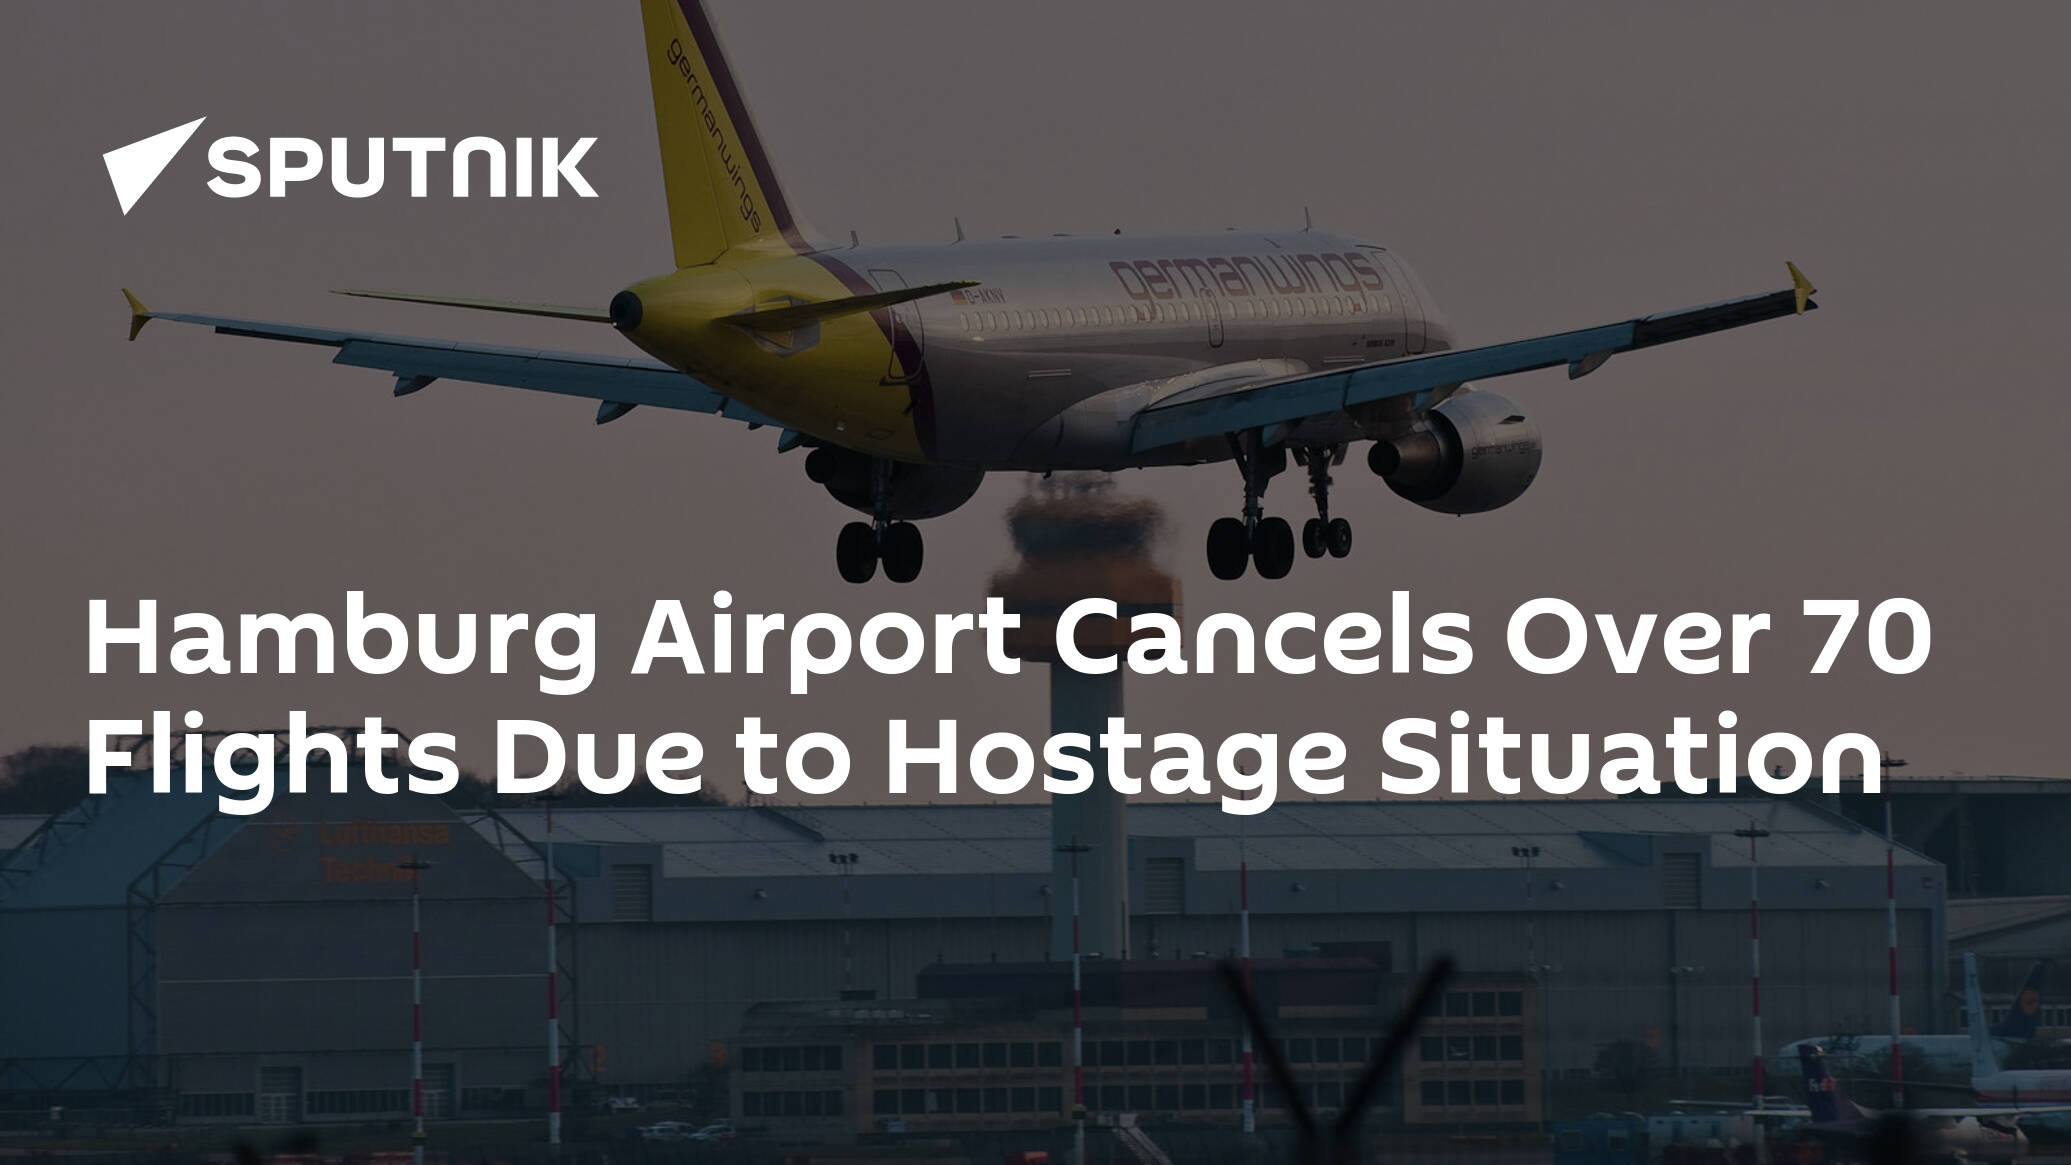 Hamburg Airport Cancels Over 70 Flights Due to Hostage Situation